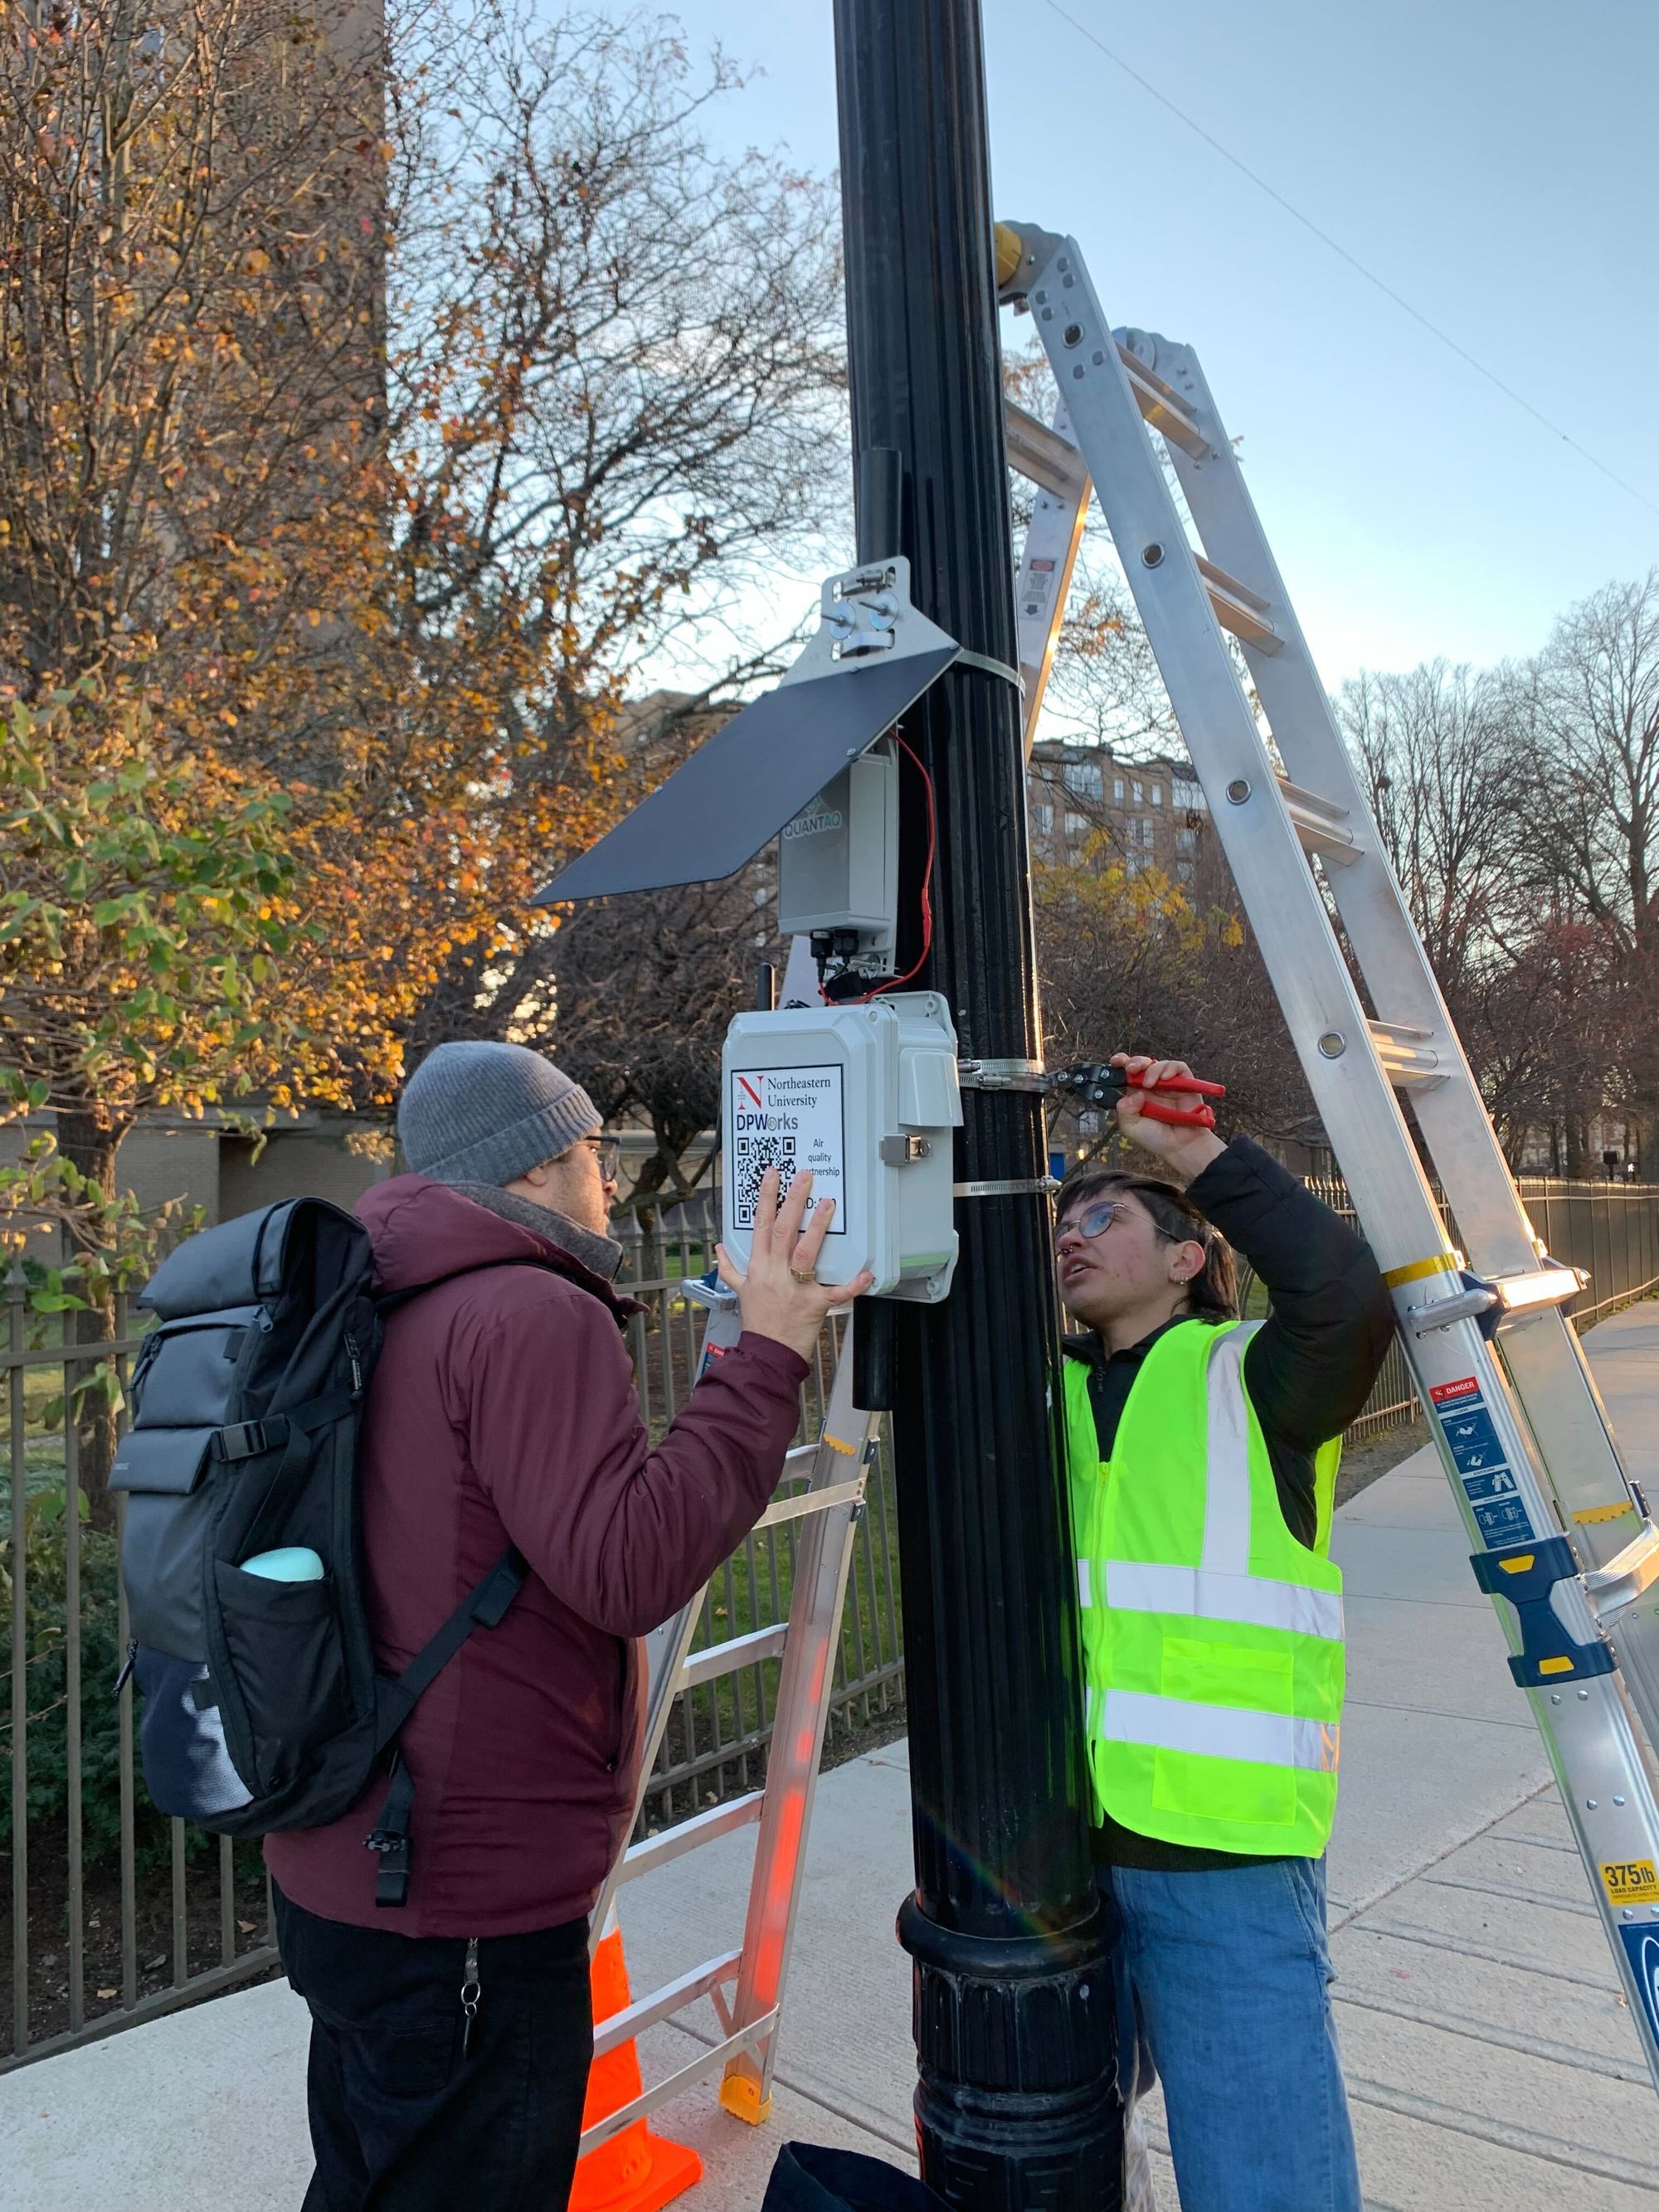 Greater Boston is now host to one of the world’s most comprehensive air quality monitoring networks